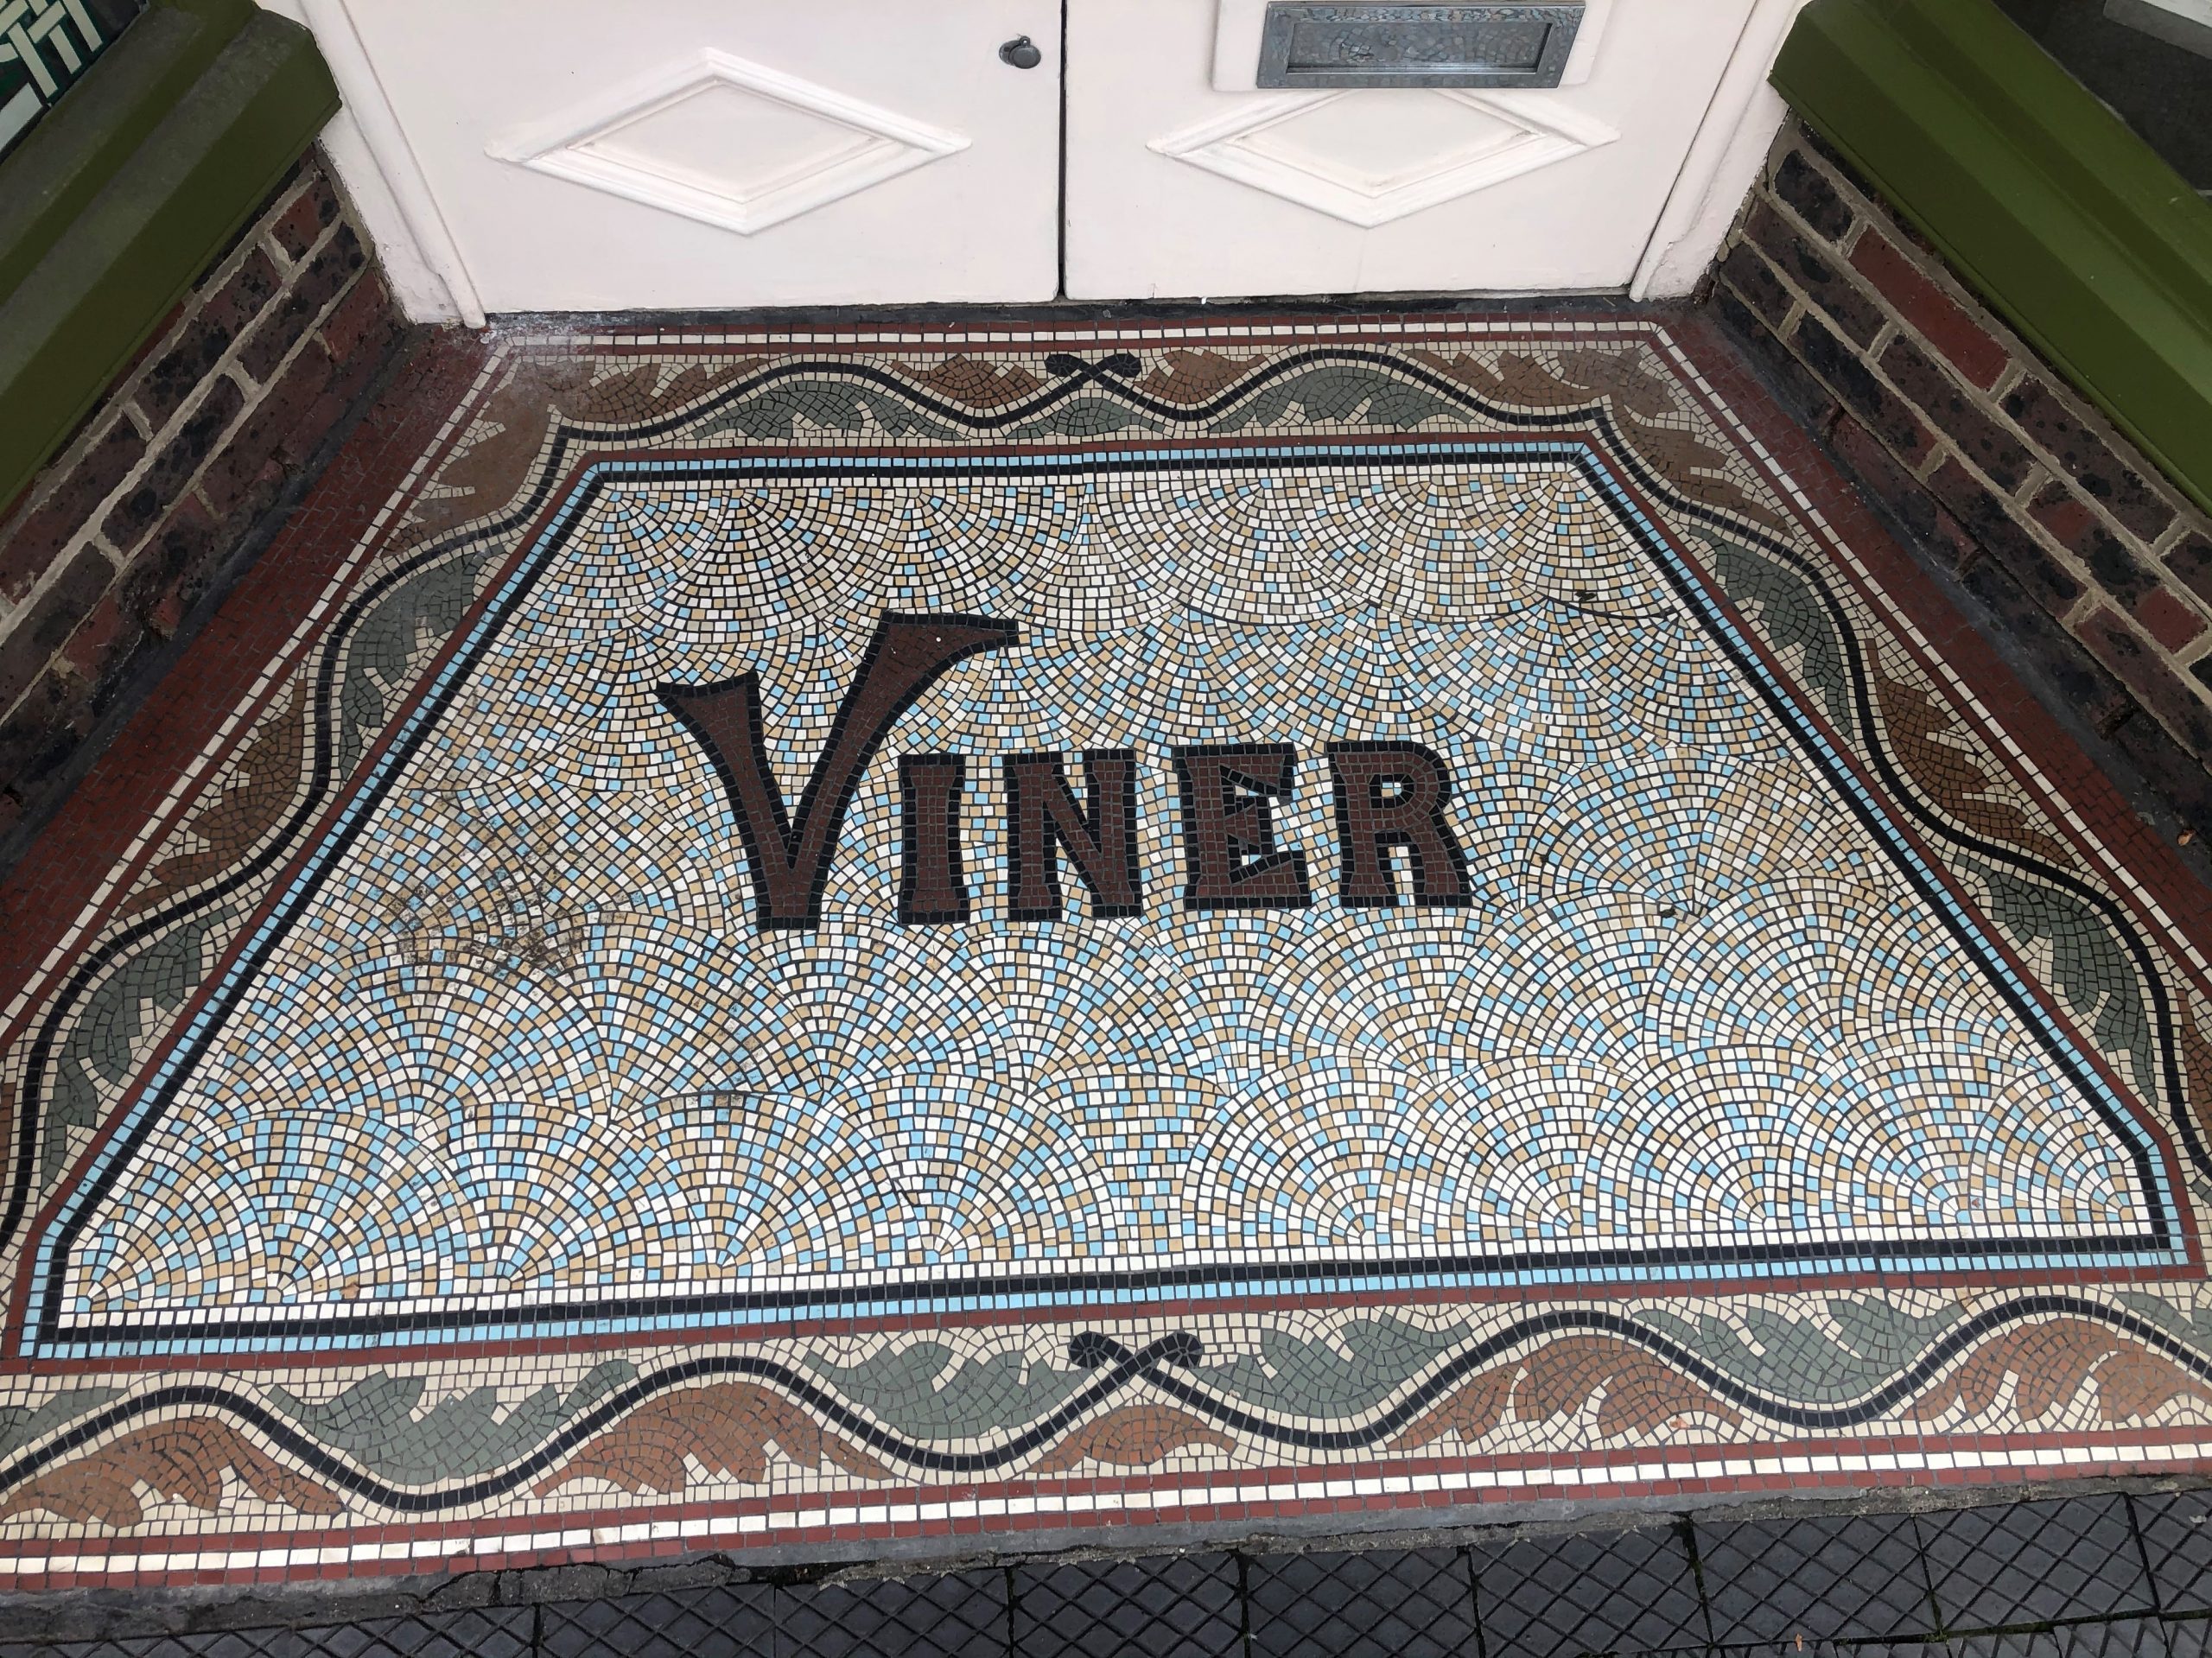 Mosaic tiles on the floor spelling out 'Viner'